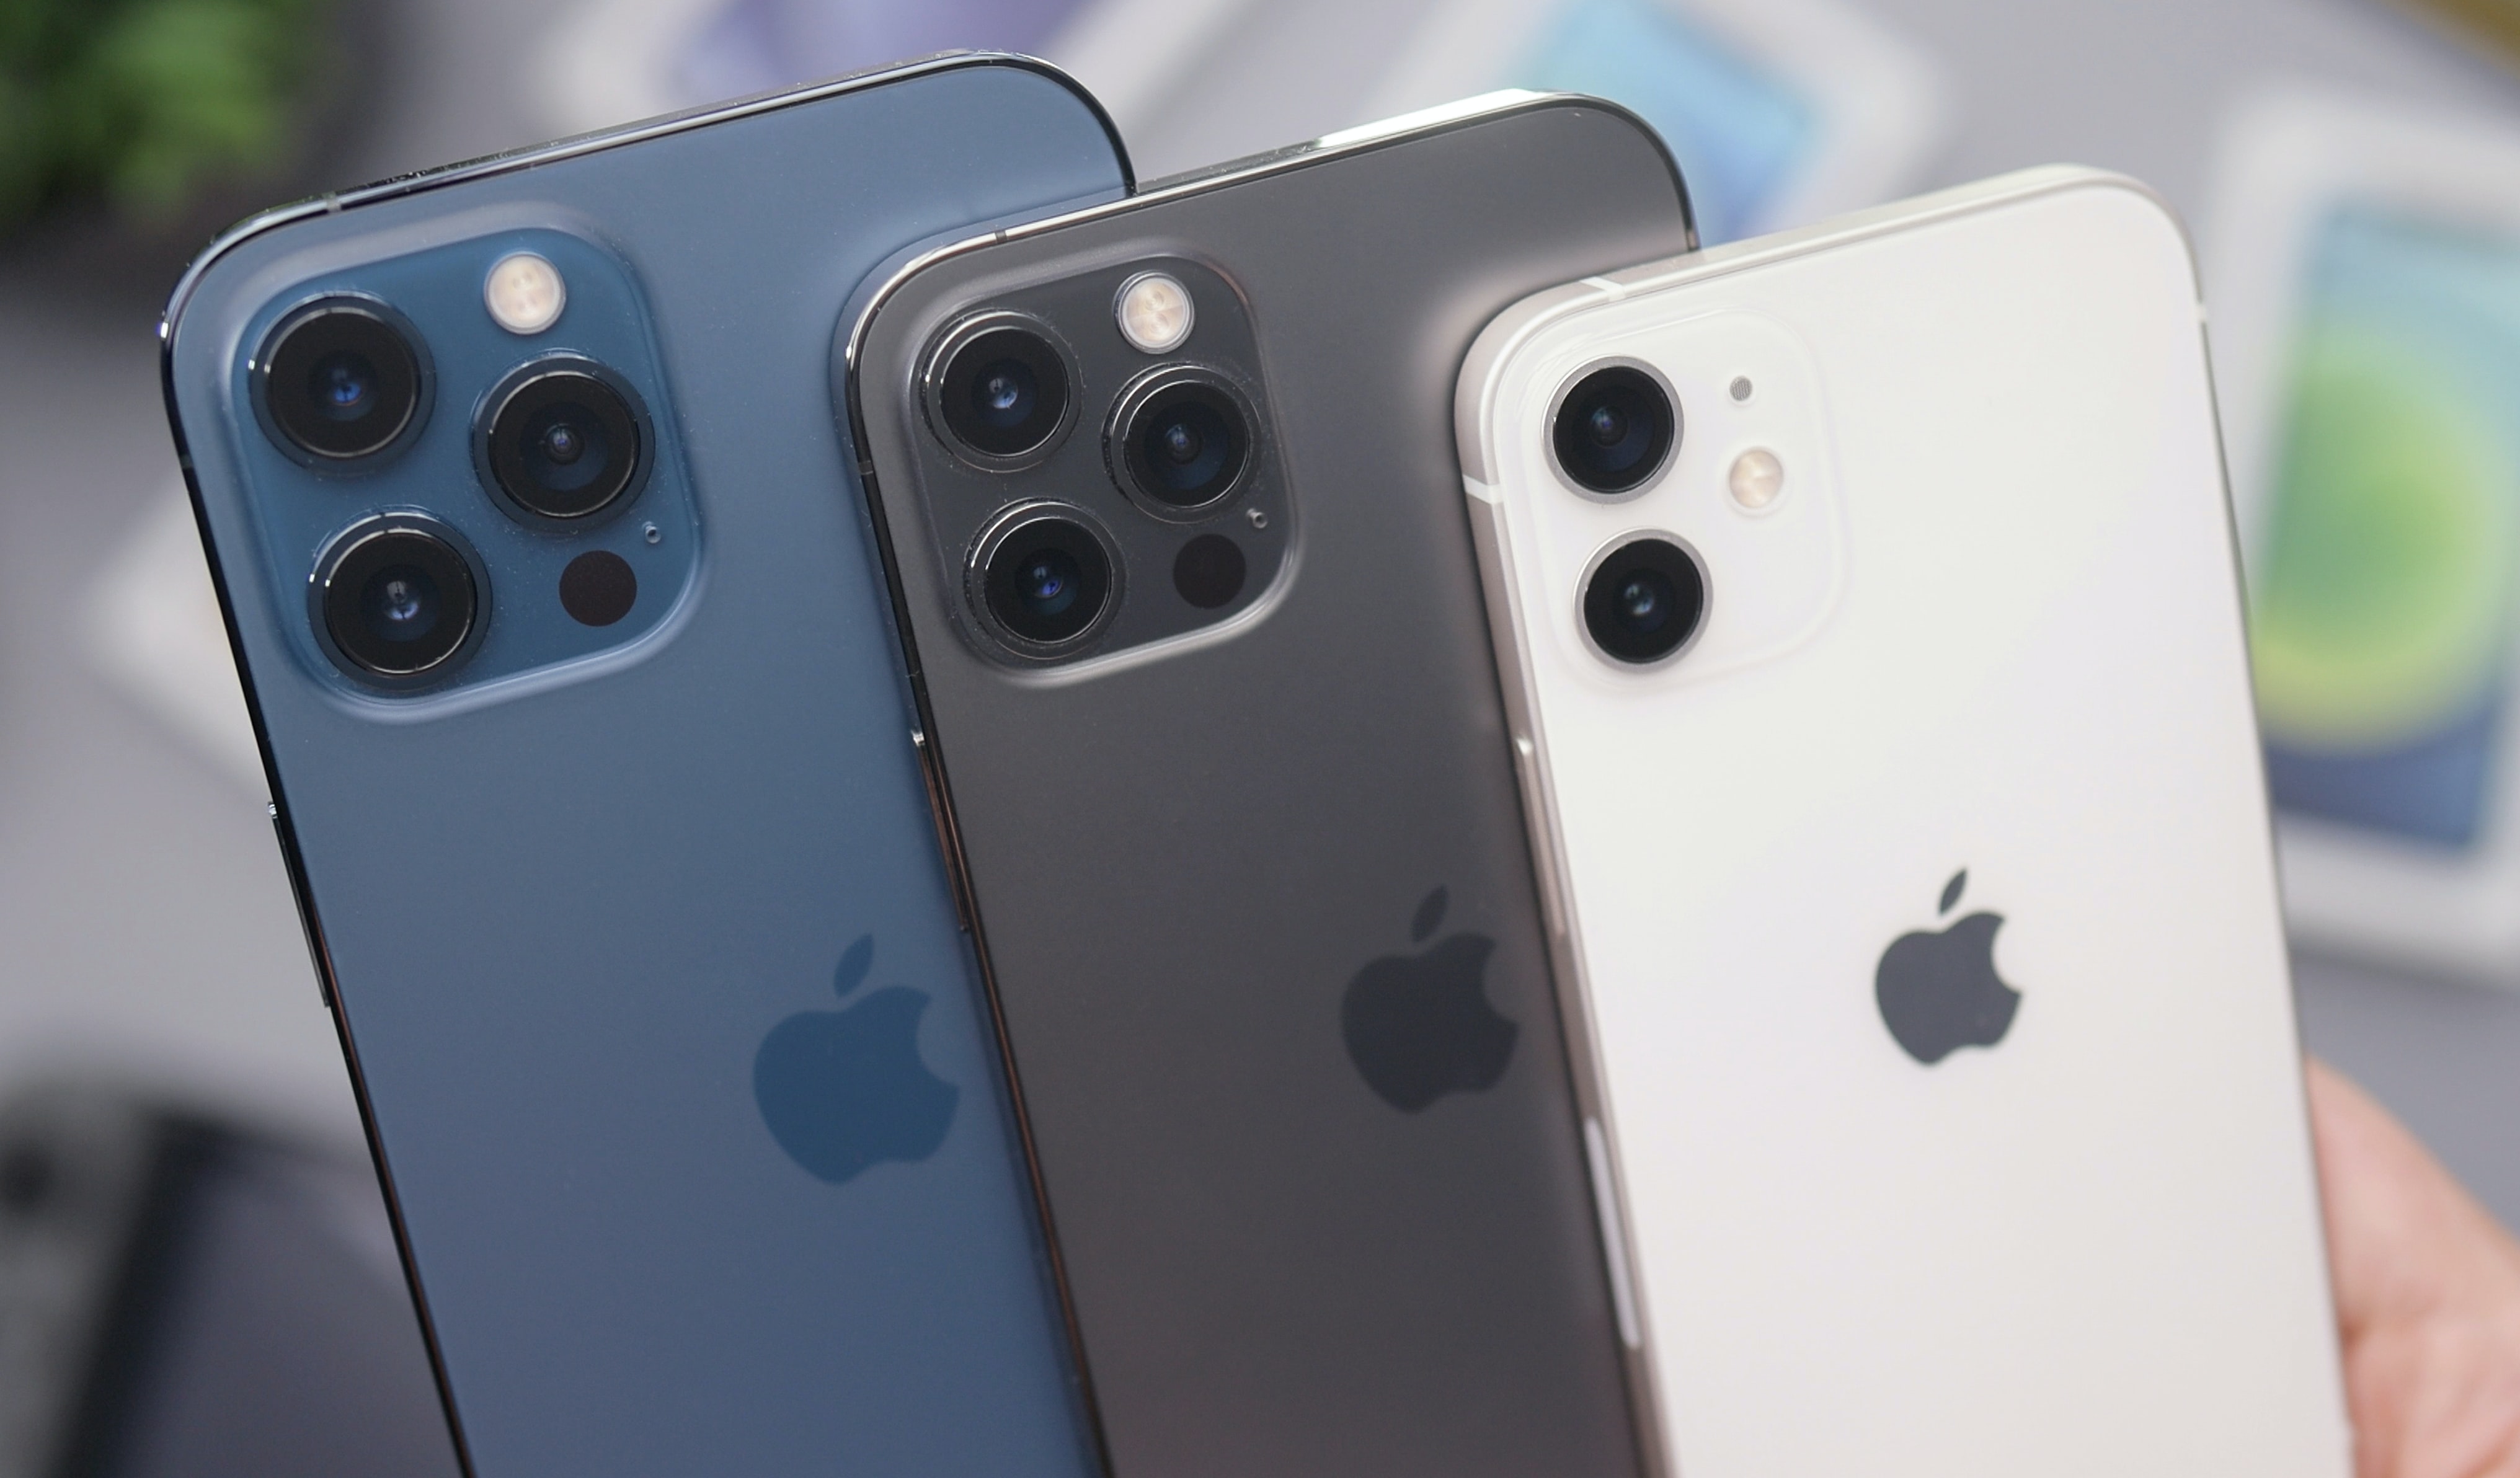 The 'buy now, pay later' option on iPhones is coming soon, and here's how it works.